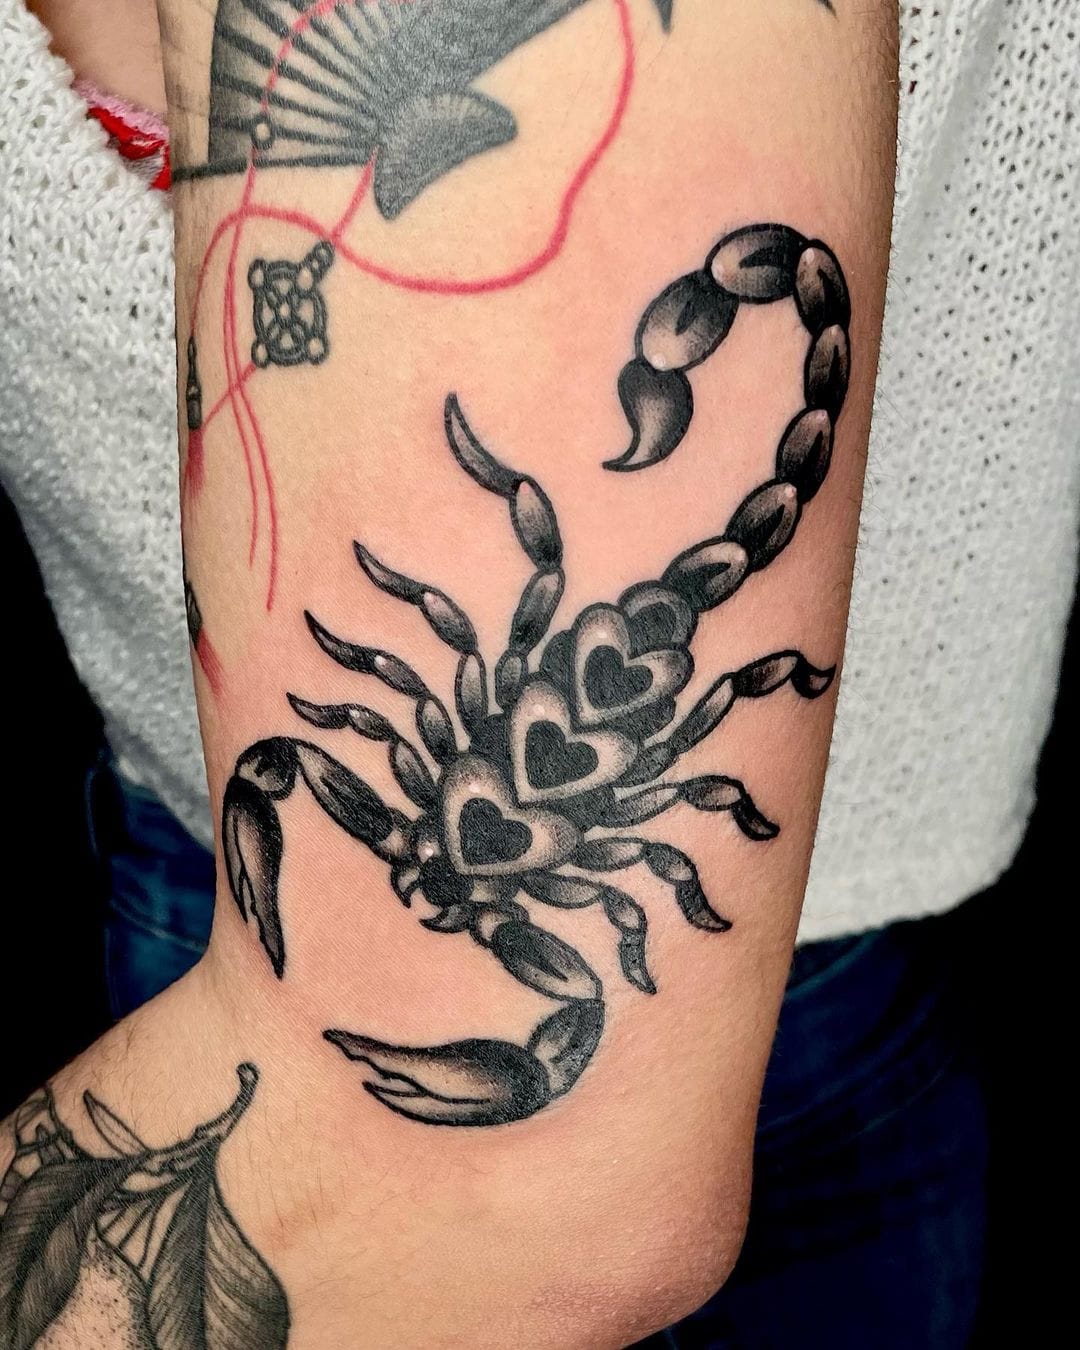 Scorpion tattoo 🦂 Swipe for full view. This design got so much hype and  requests! Thanks everyone for your support. & Thxx Shani, y... | Instagram